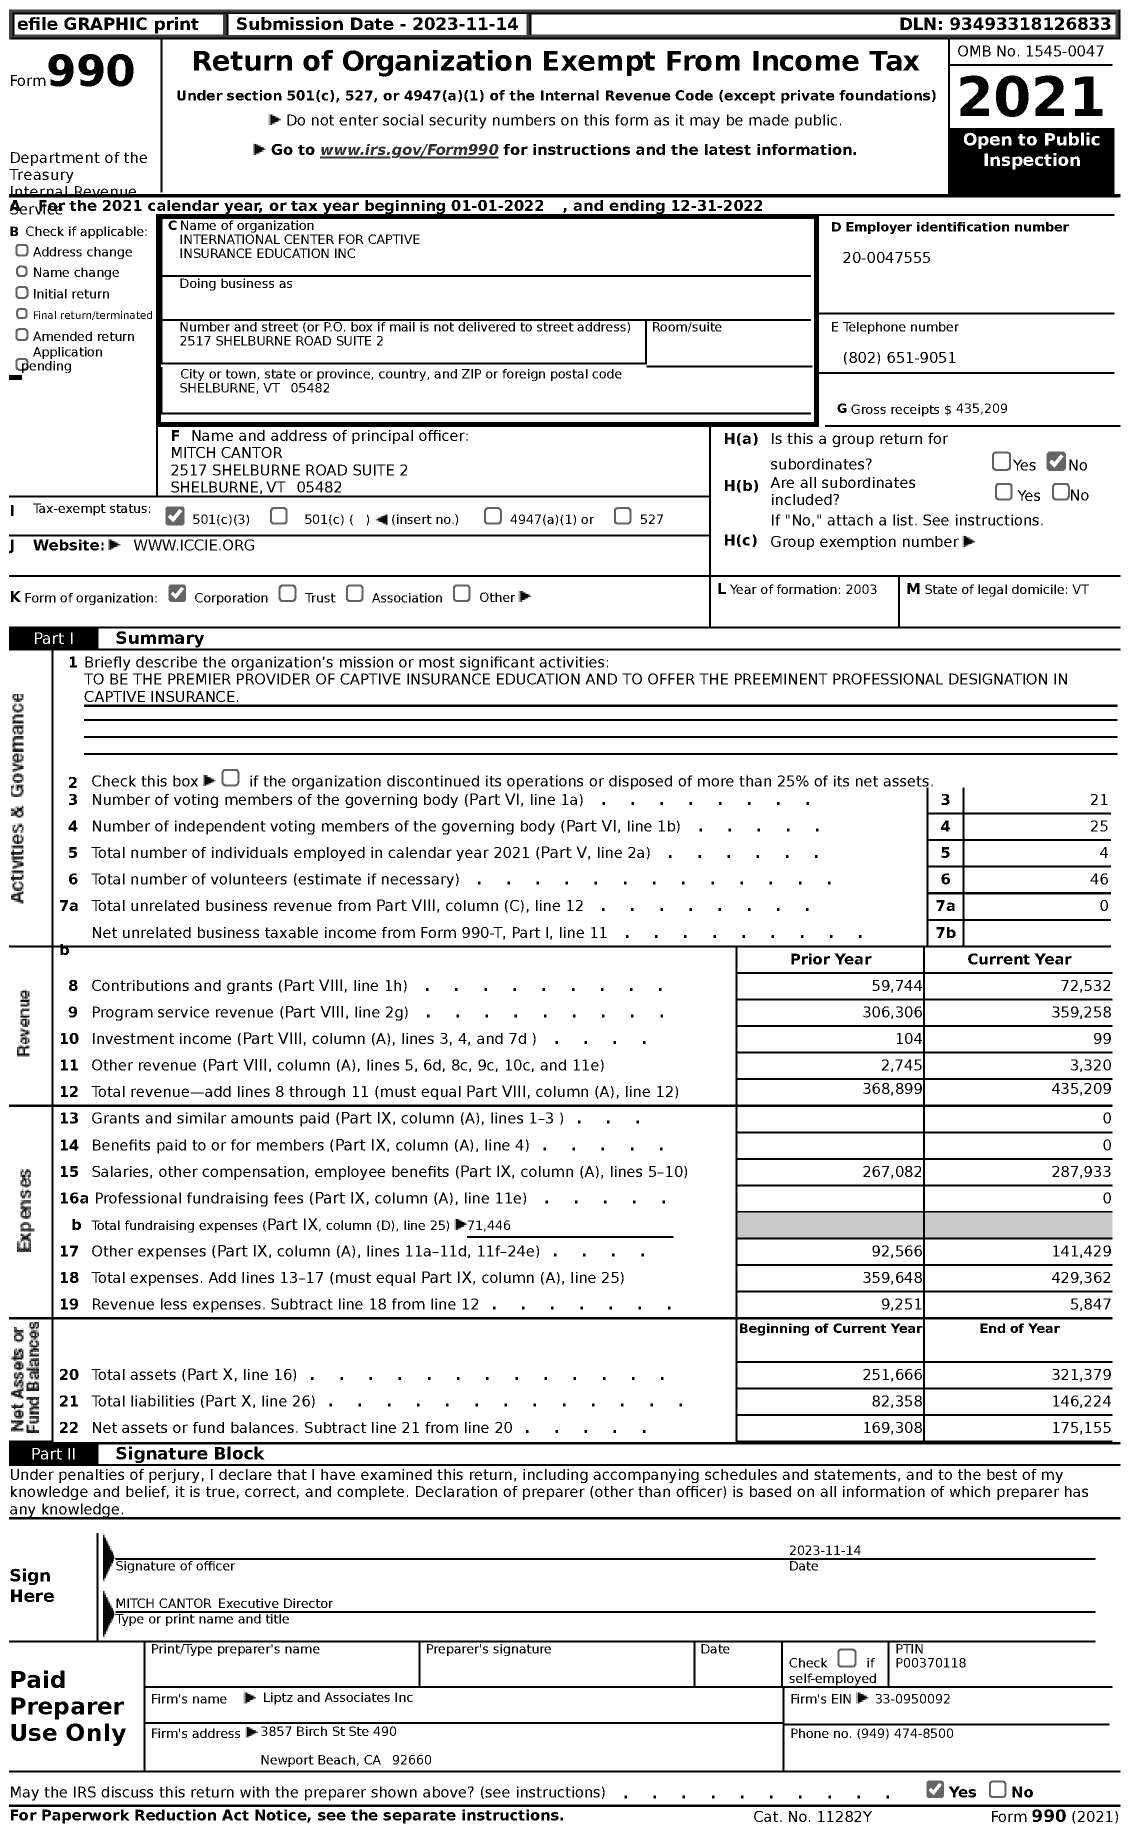 Image of first page of 2022 Form 990 for International Center for Captive Insurance Education